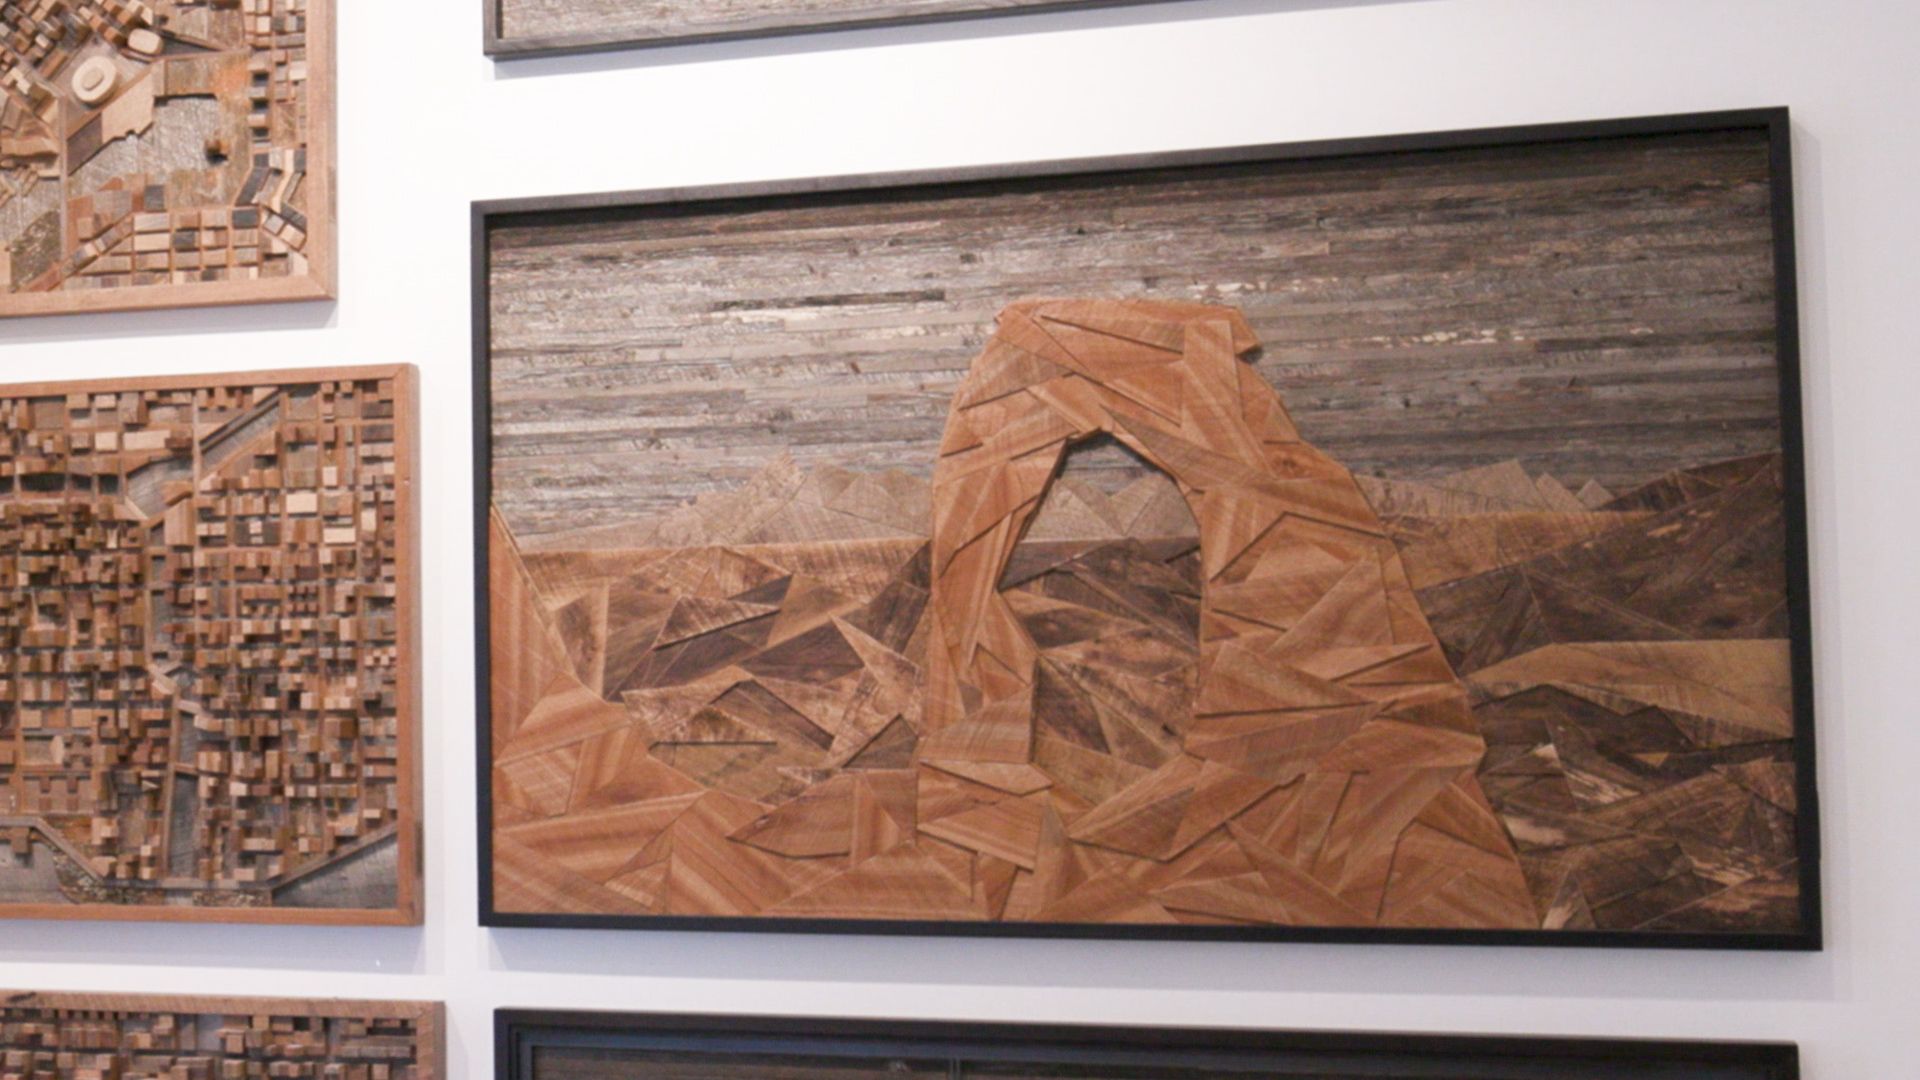 Artist Burns Intricate Designs Into Pieces of Reclaimed Wood